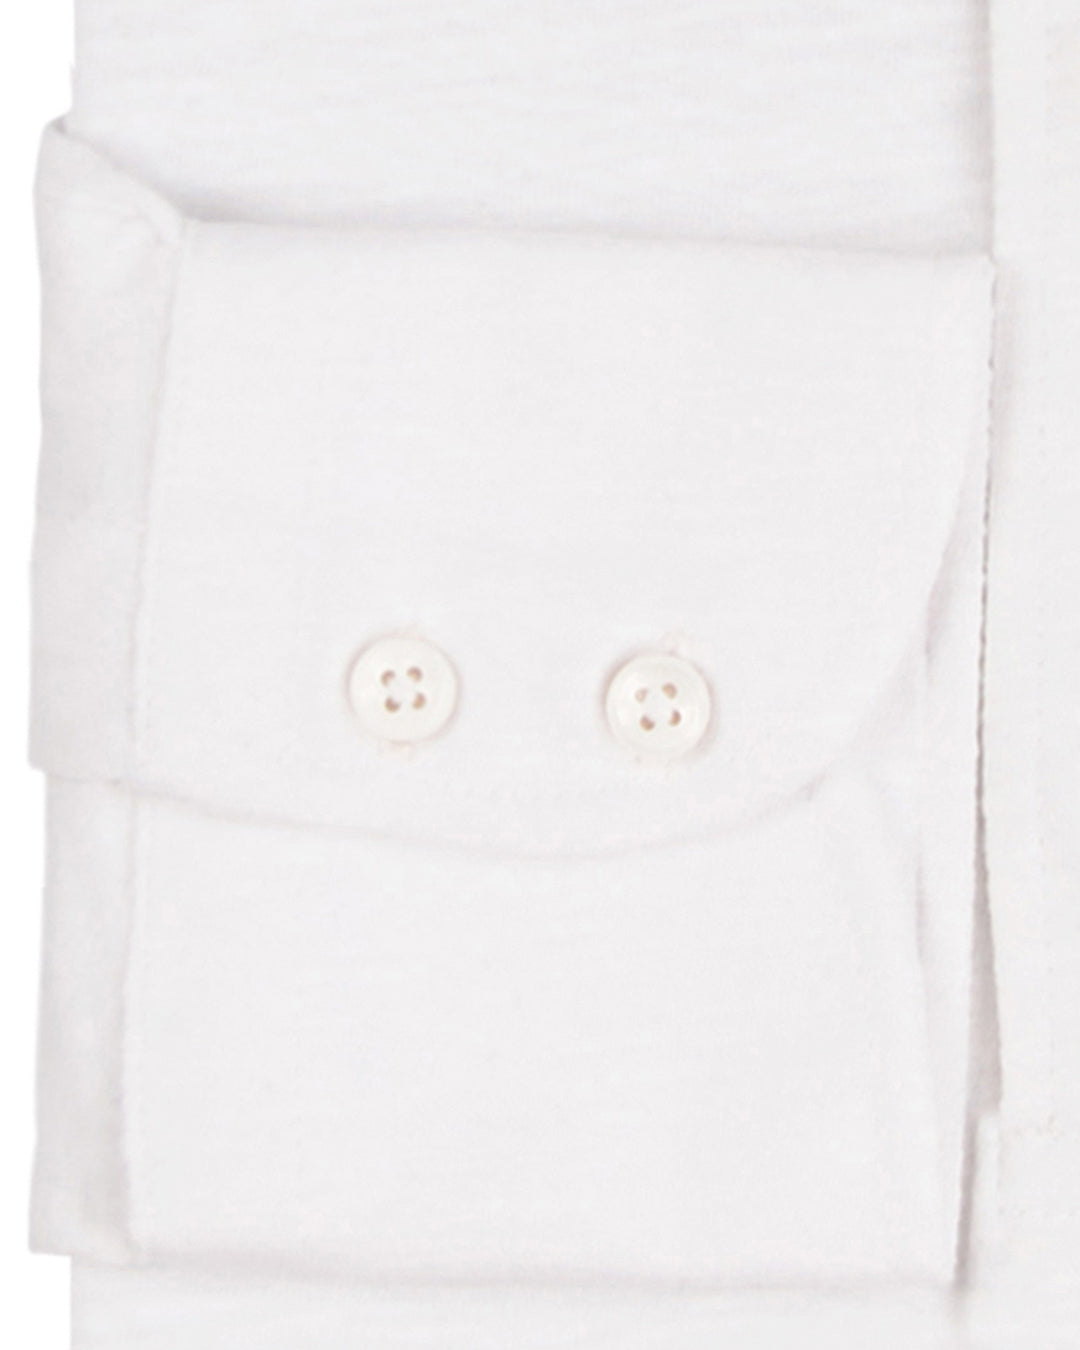 Cuff of the custom oxford polo shirt for men by Luxire in white heather